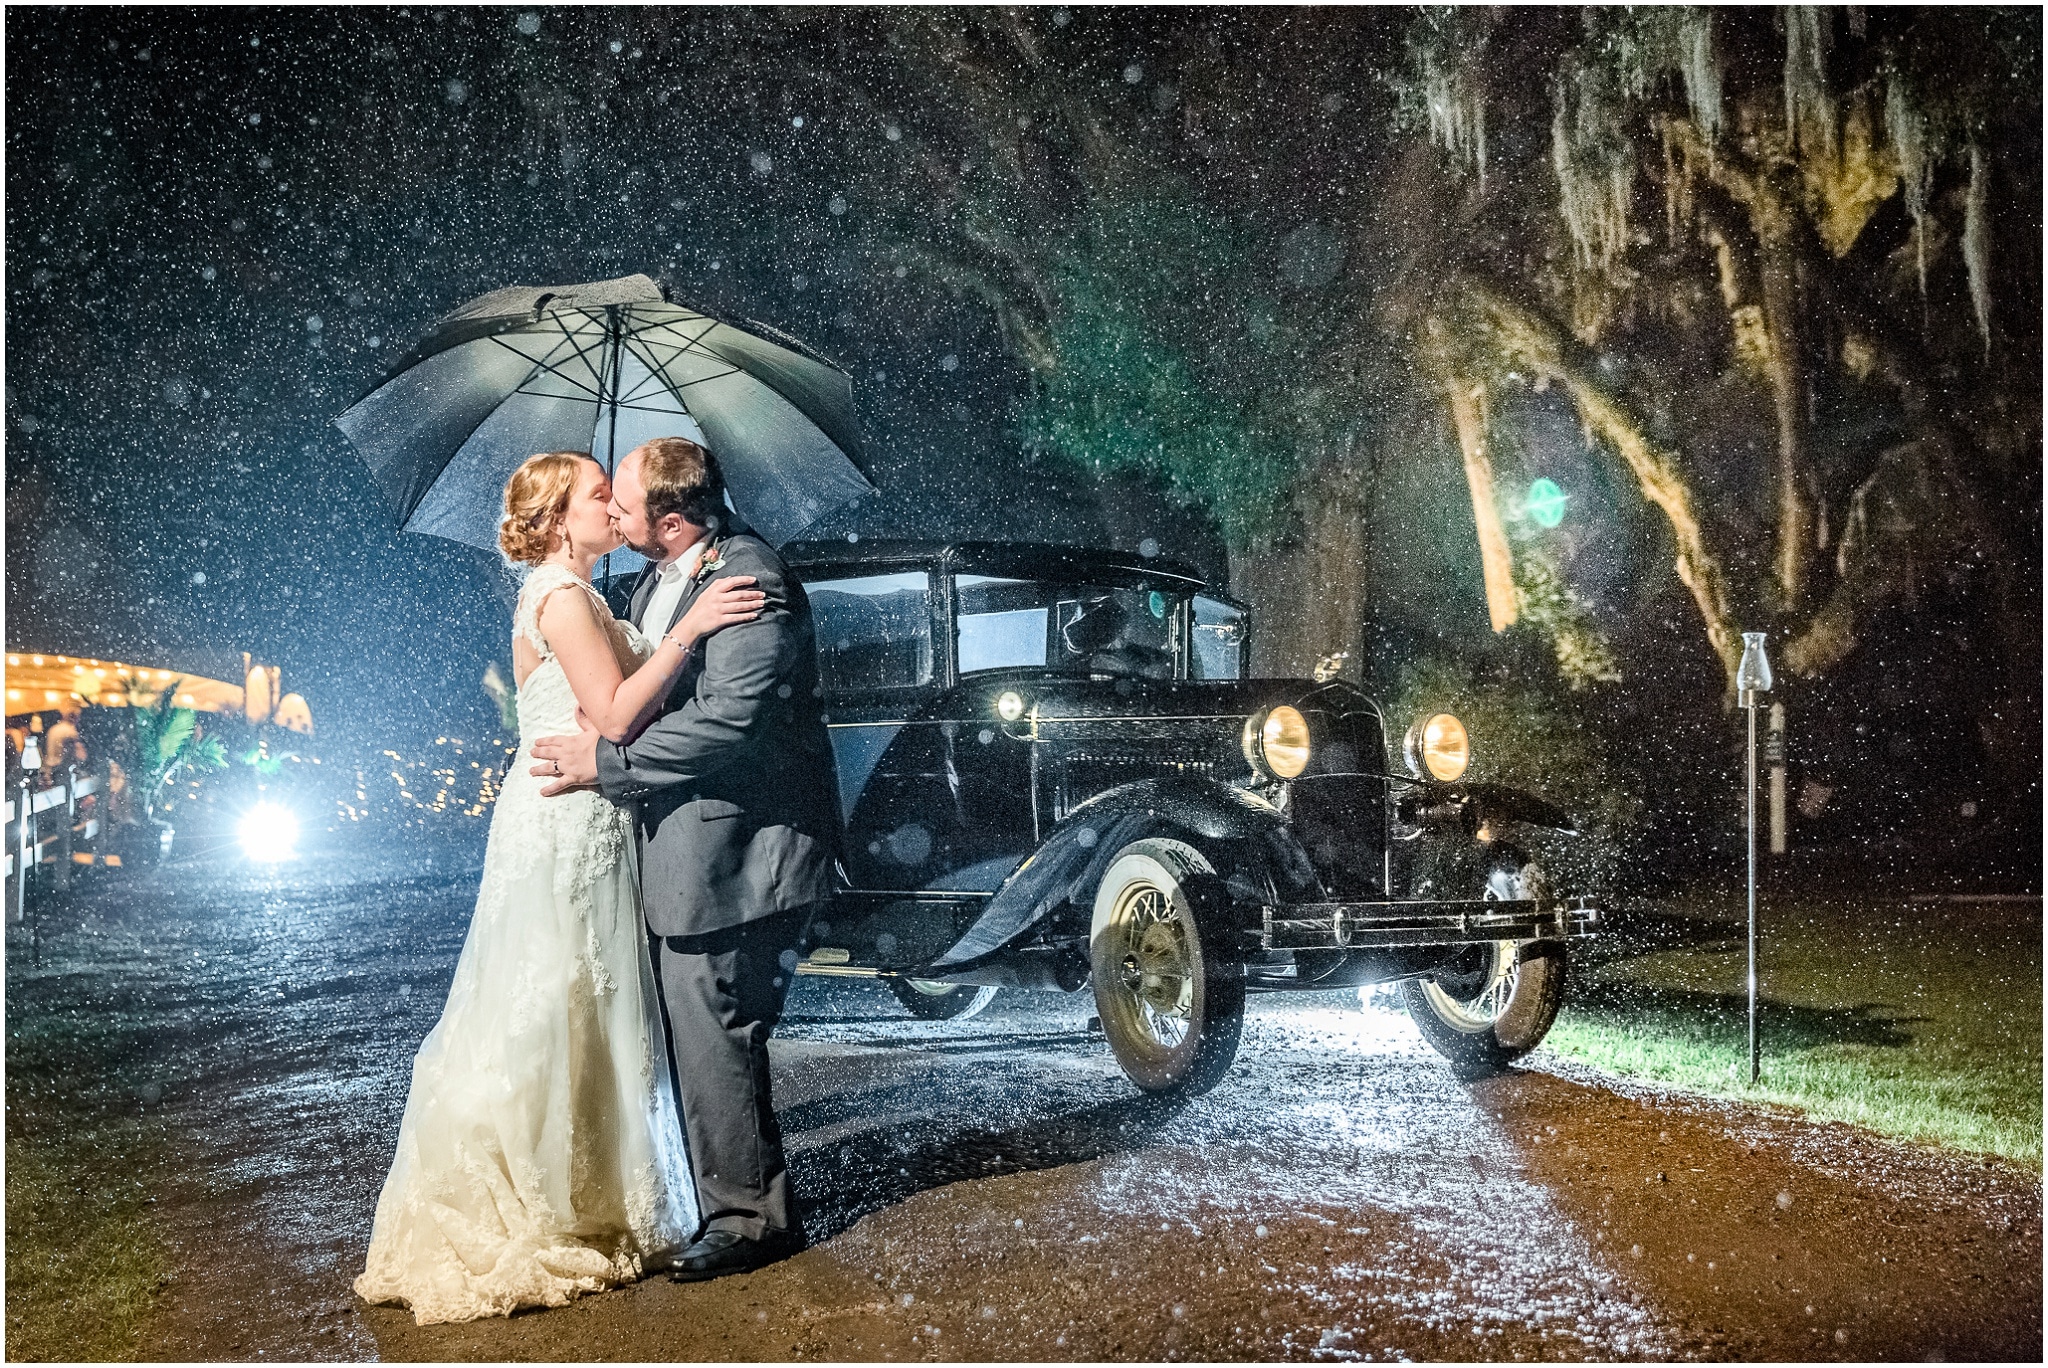 Paige and Dorcey kissing in the rain under an umbrella in front of an old car, Upper Mill Plantation Wedding Session 1, Conway, South Carolina, Wedding coordinator, flowers and Cake - Willow Event Designs, Venue - Upper Mill Plantation, DJ - Carolina Entertainment, Dress - Foxy Lady, www.onelifephoto.net Photography